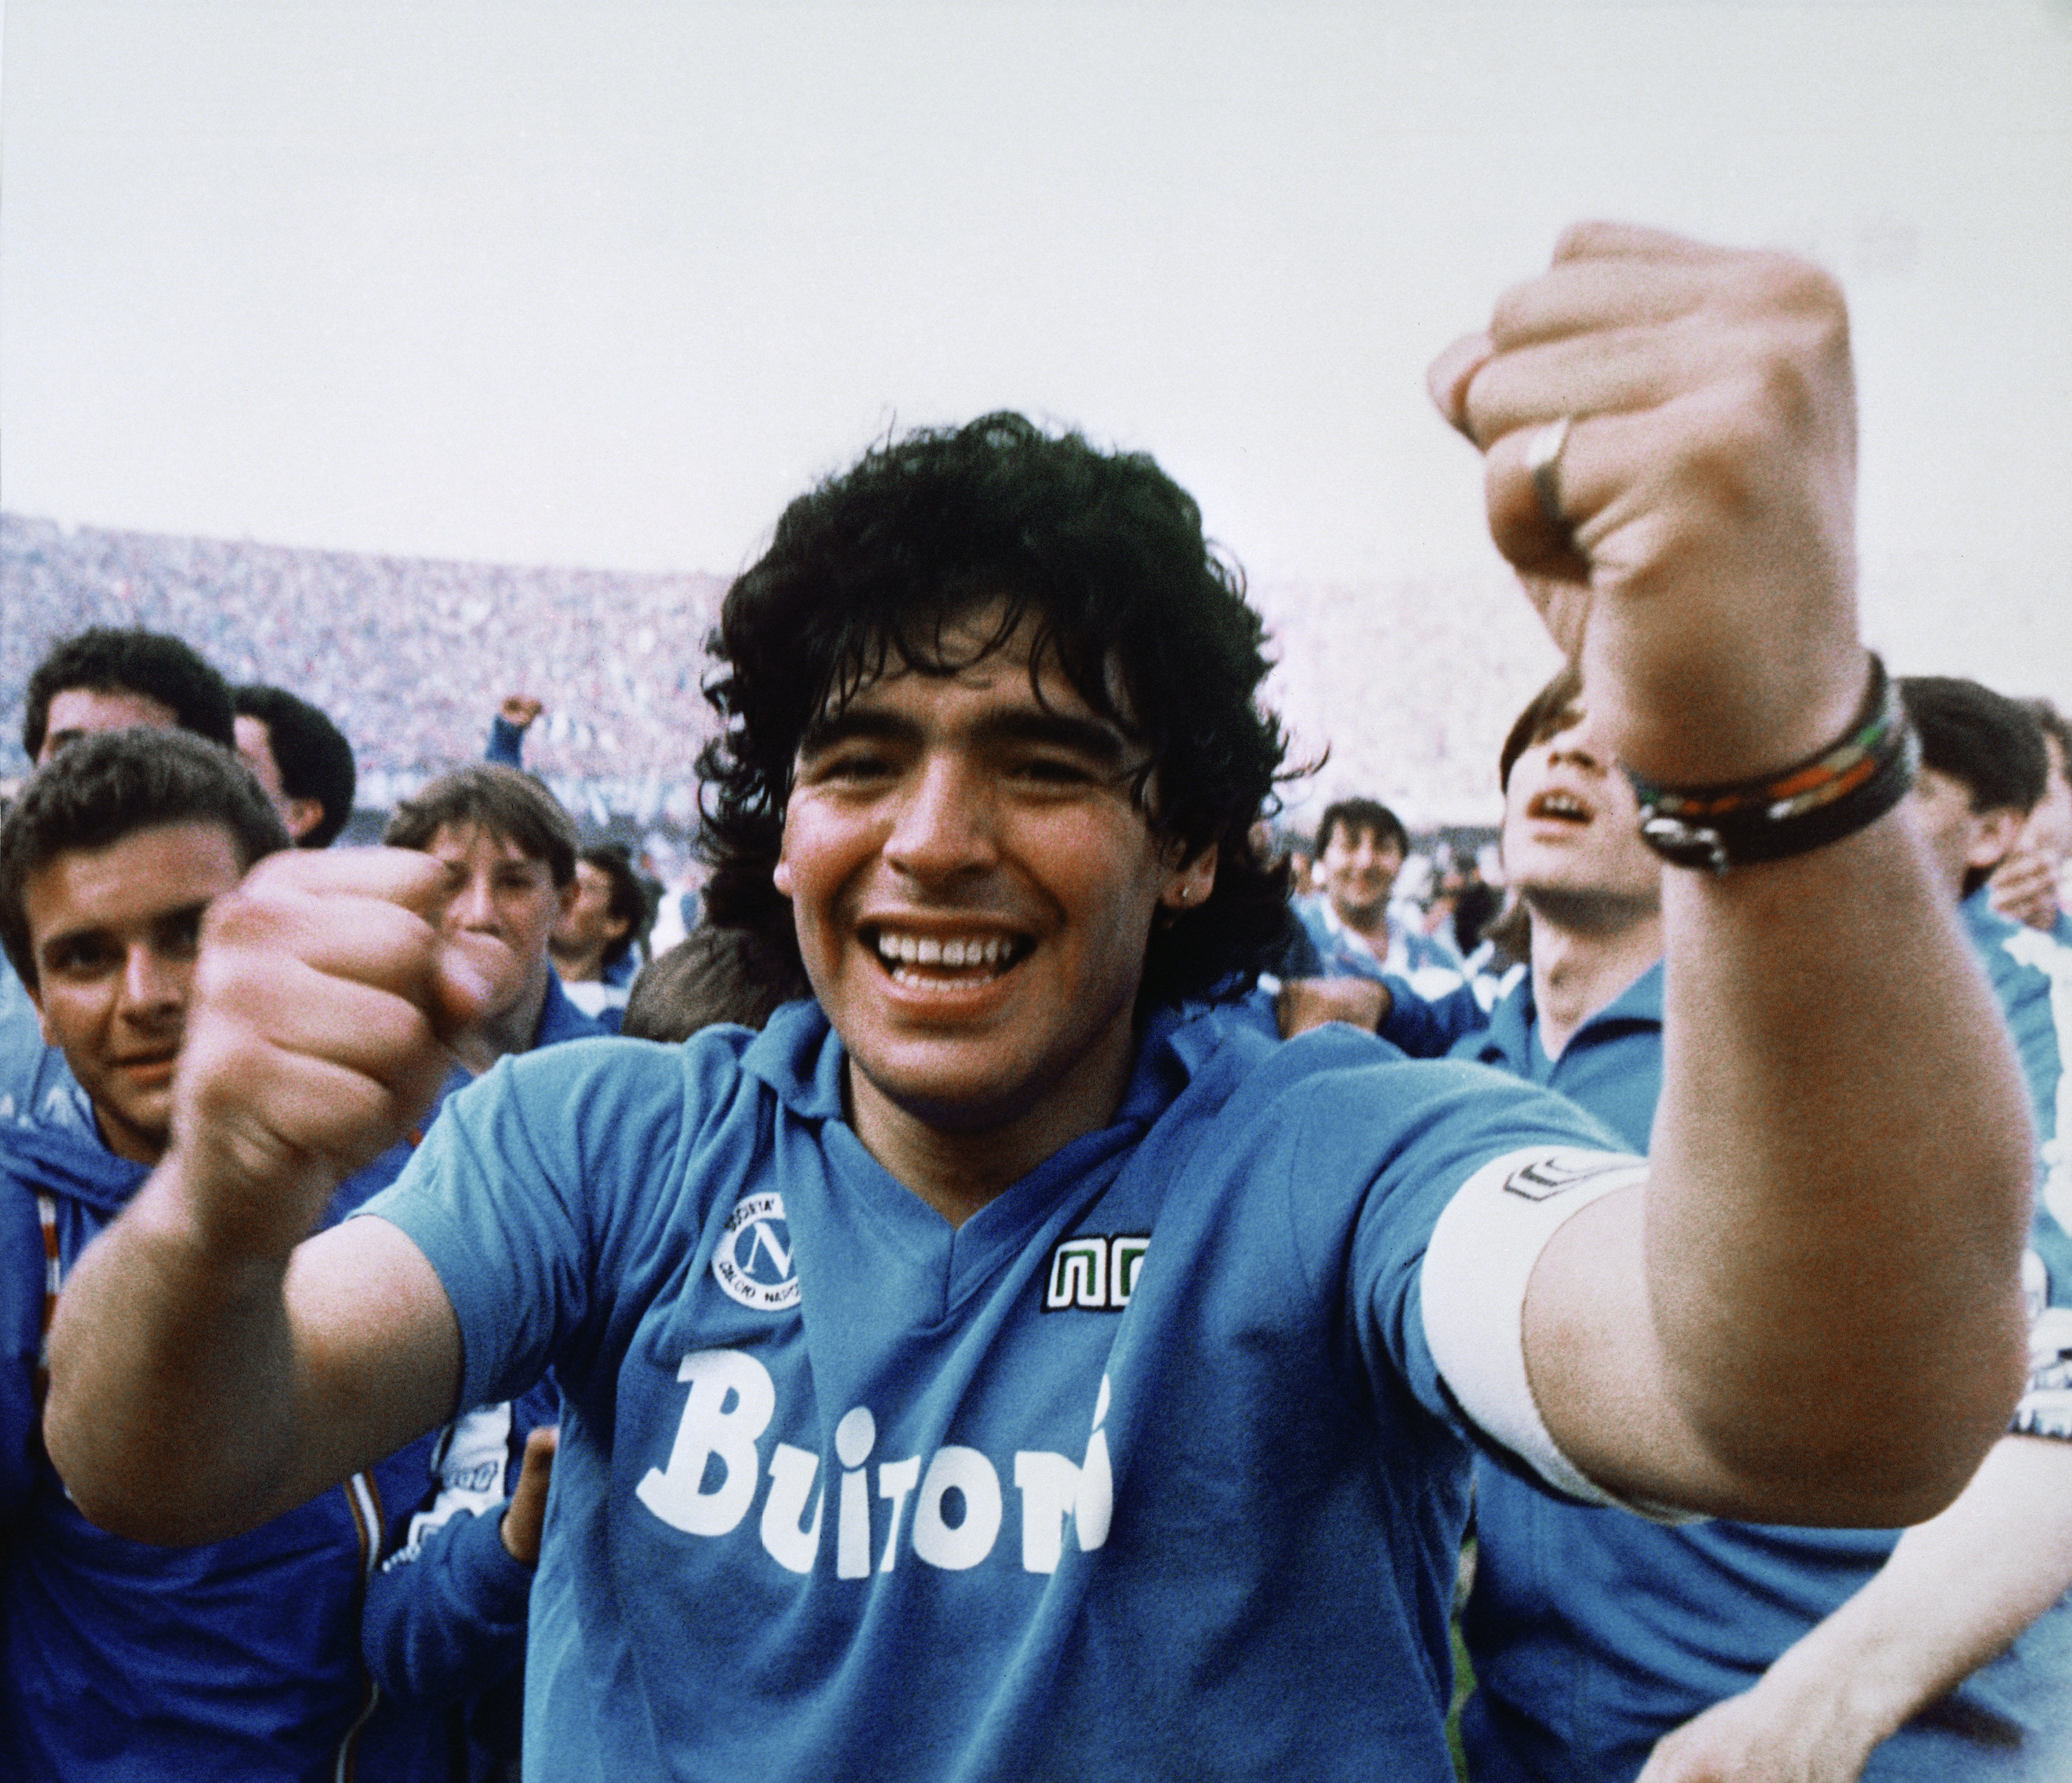 Argentine soccer superstar Diego Armando Maradona cheers after the Napoli team clinched its first Italian major league title in Naples, Italy, on May 10, 1987. (AP Photo/Massimo Sambucetti)